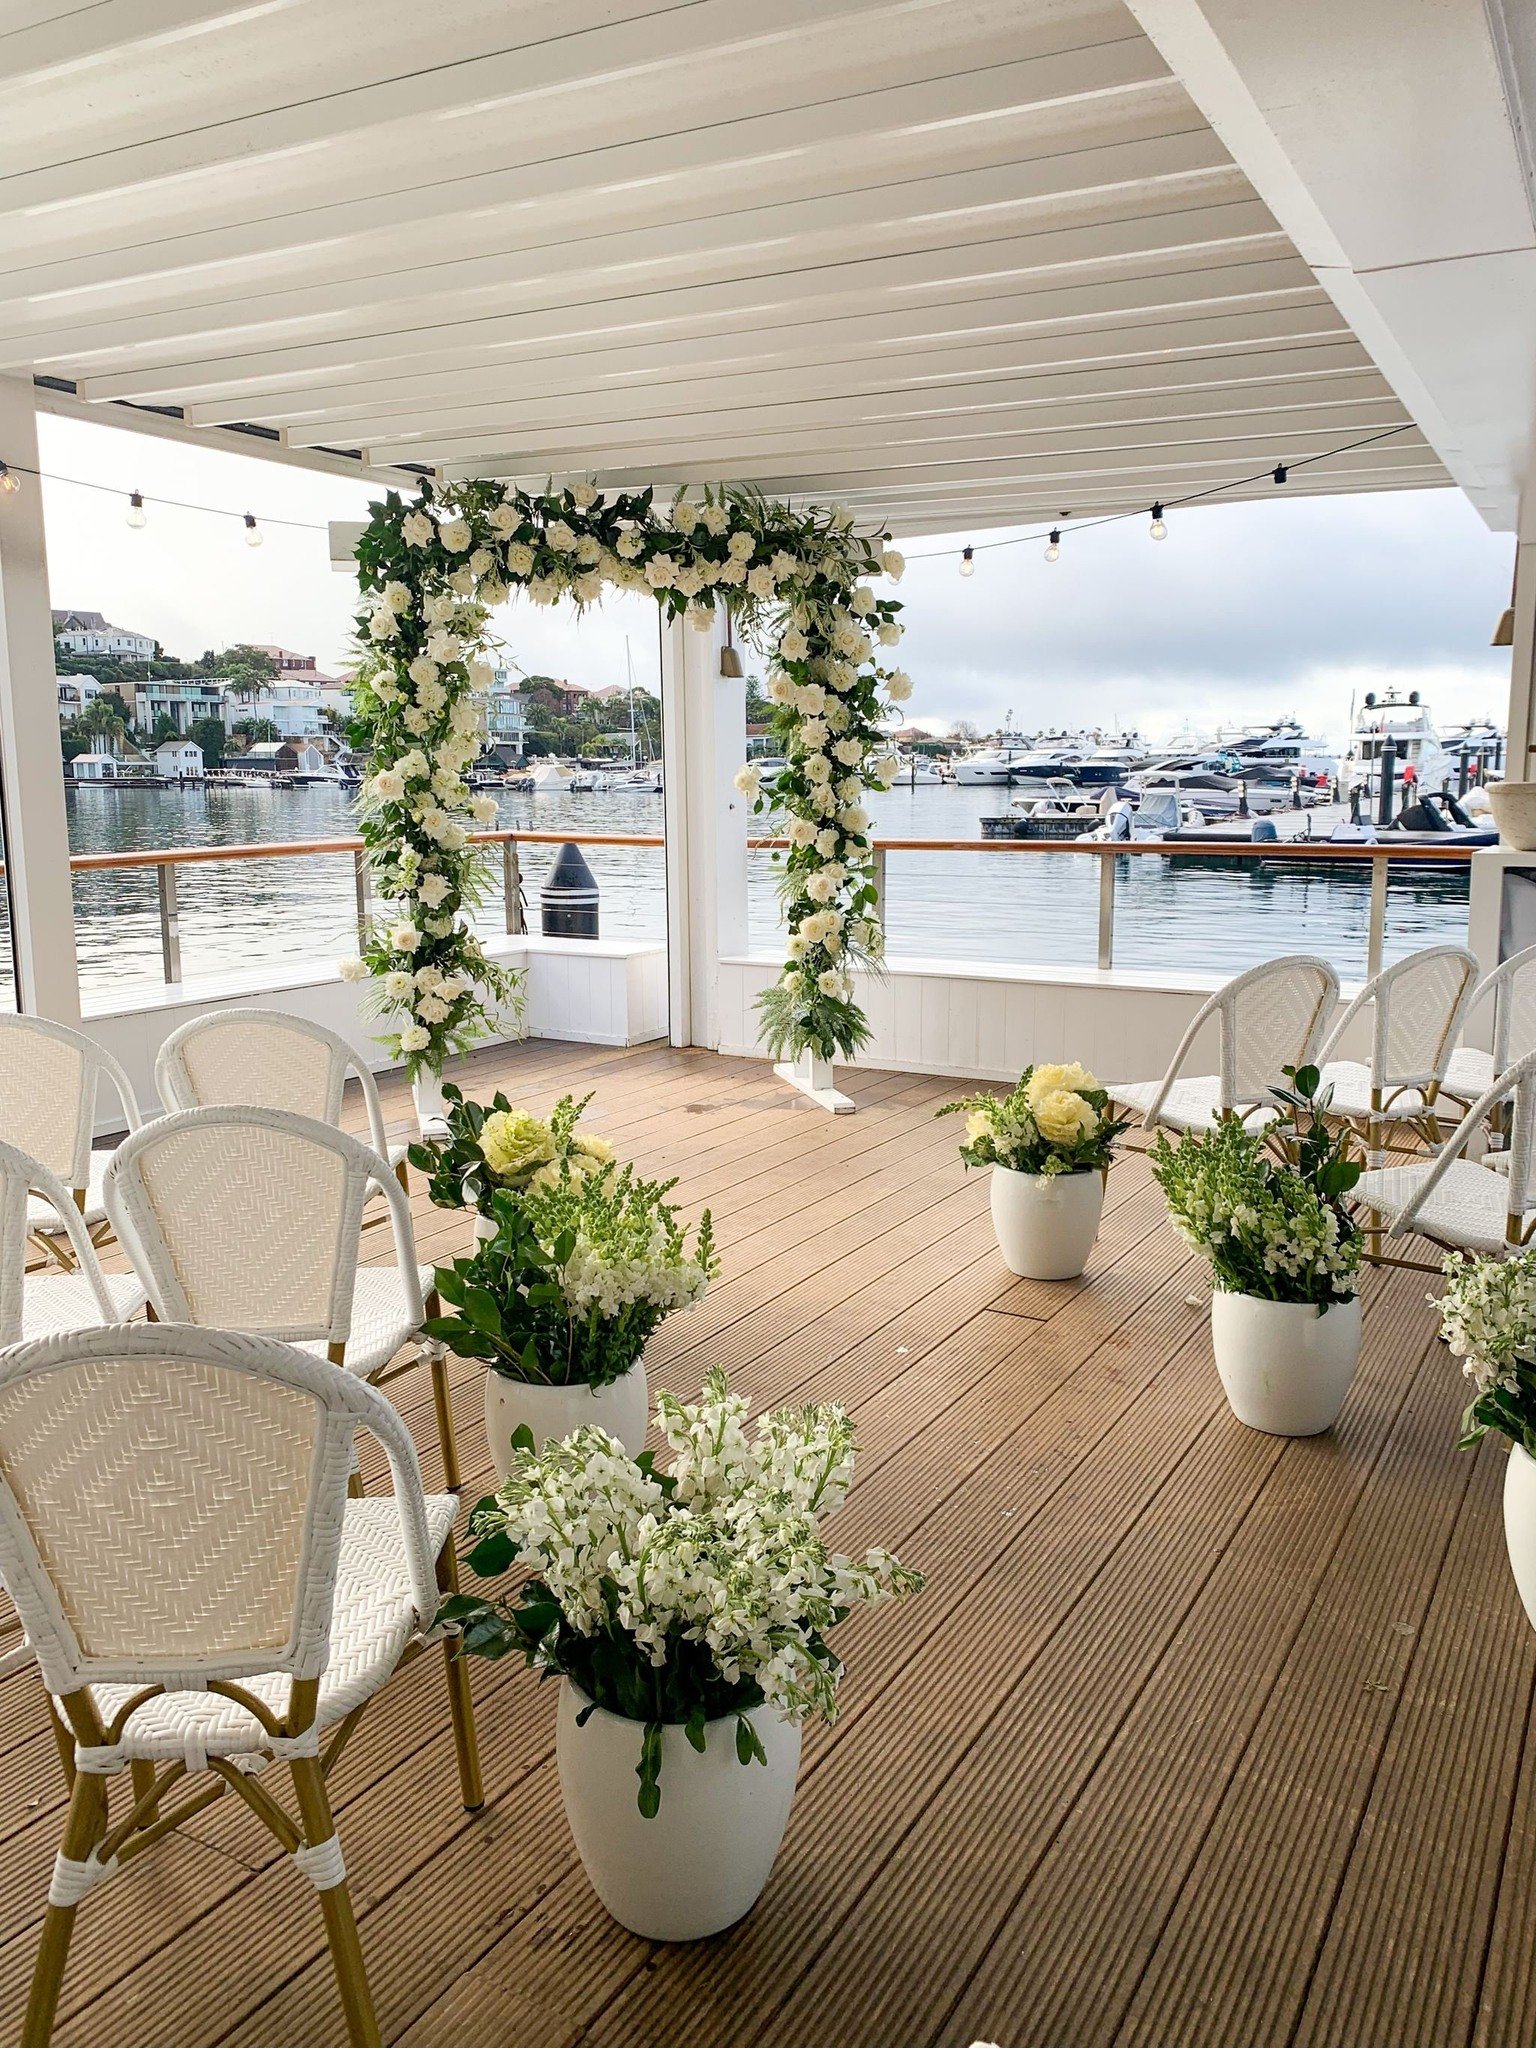 The most beautiful ceremony arrangement at The Boathouse Rose Bay! 
Speak to our team today about bringing your dream event to life! 🤍